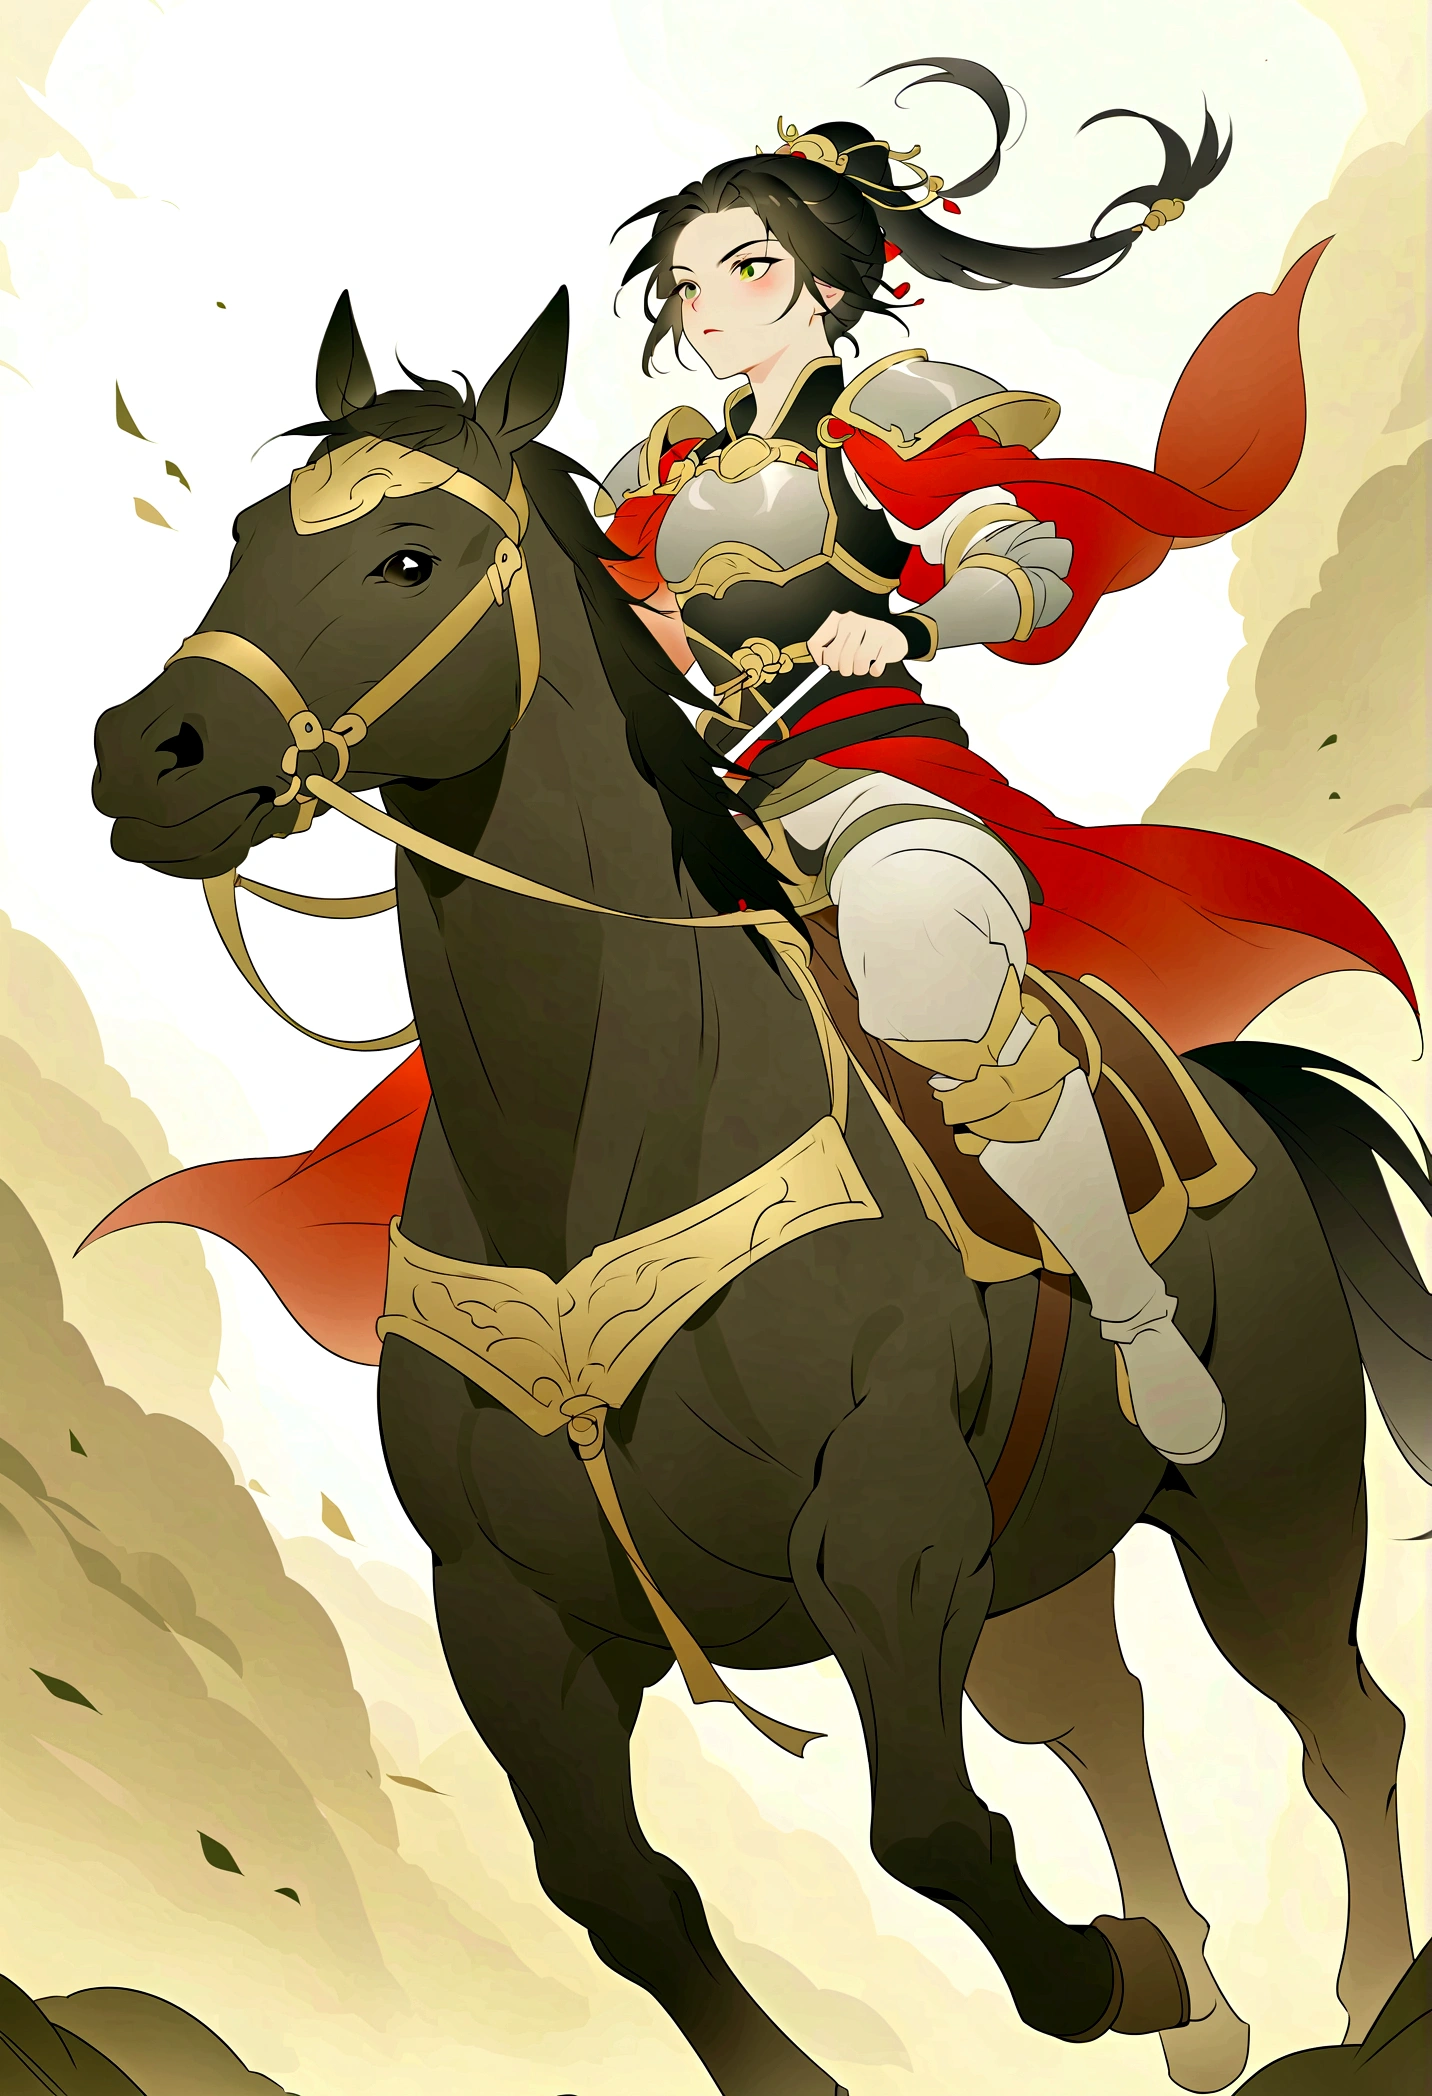 Three Kingdoms, Zhao Zilong, horse riding, Wield a spear, Heroic and fearless, Wearing armor, Behind it is the battlefield,